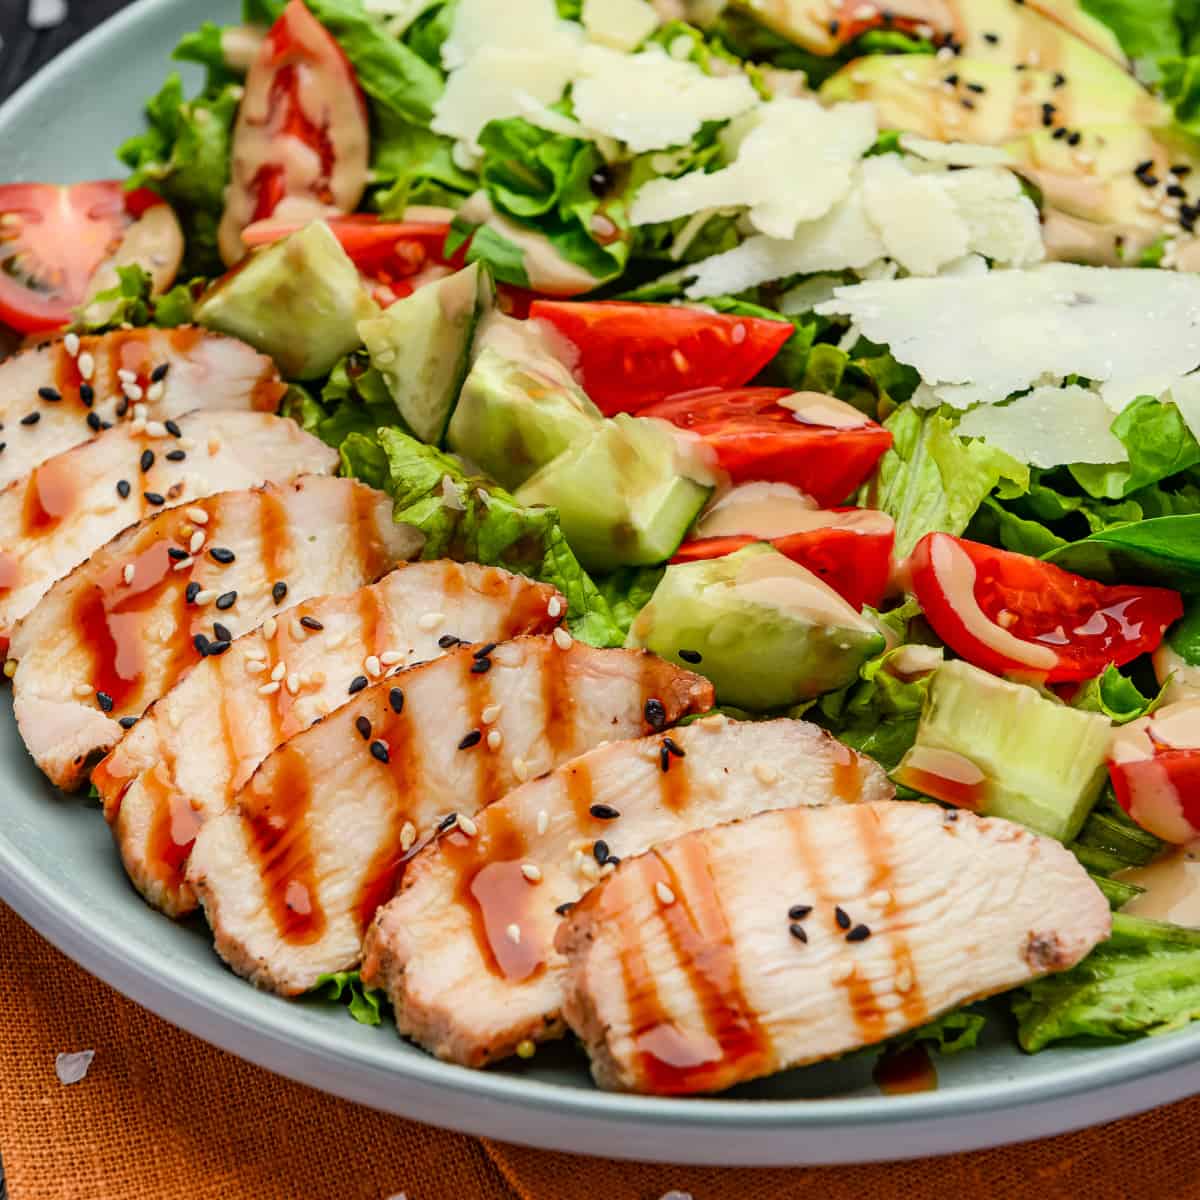 Close up of salad with chicken, avocado, cucumbers, tomatoes and parmesan cheese.